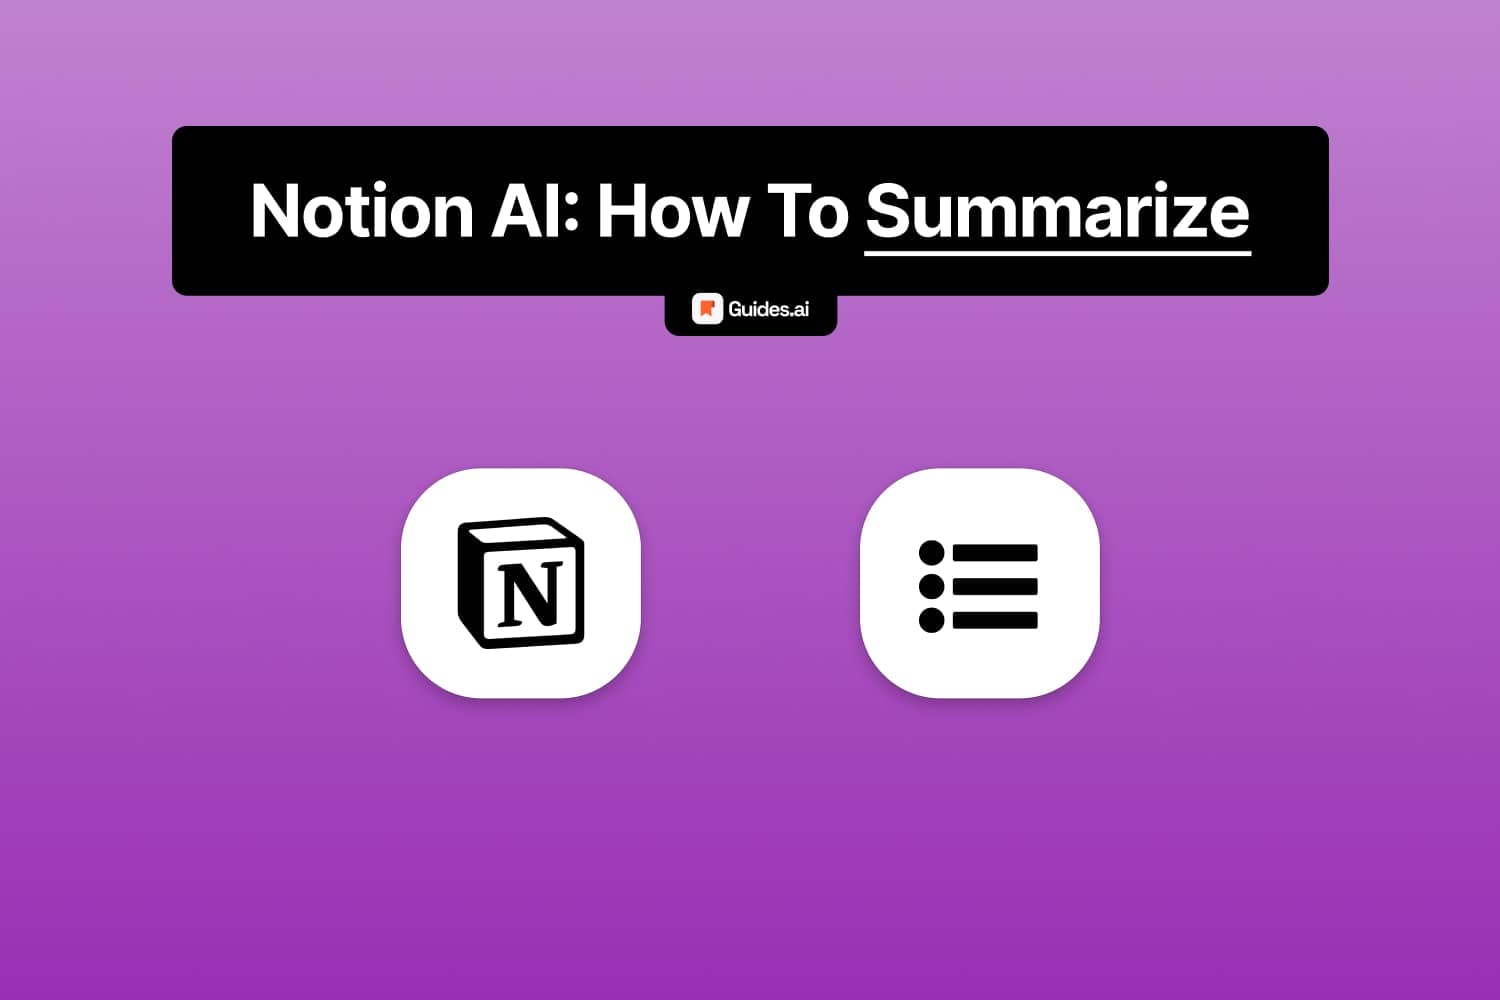 How to summarize Notion documents